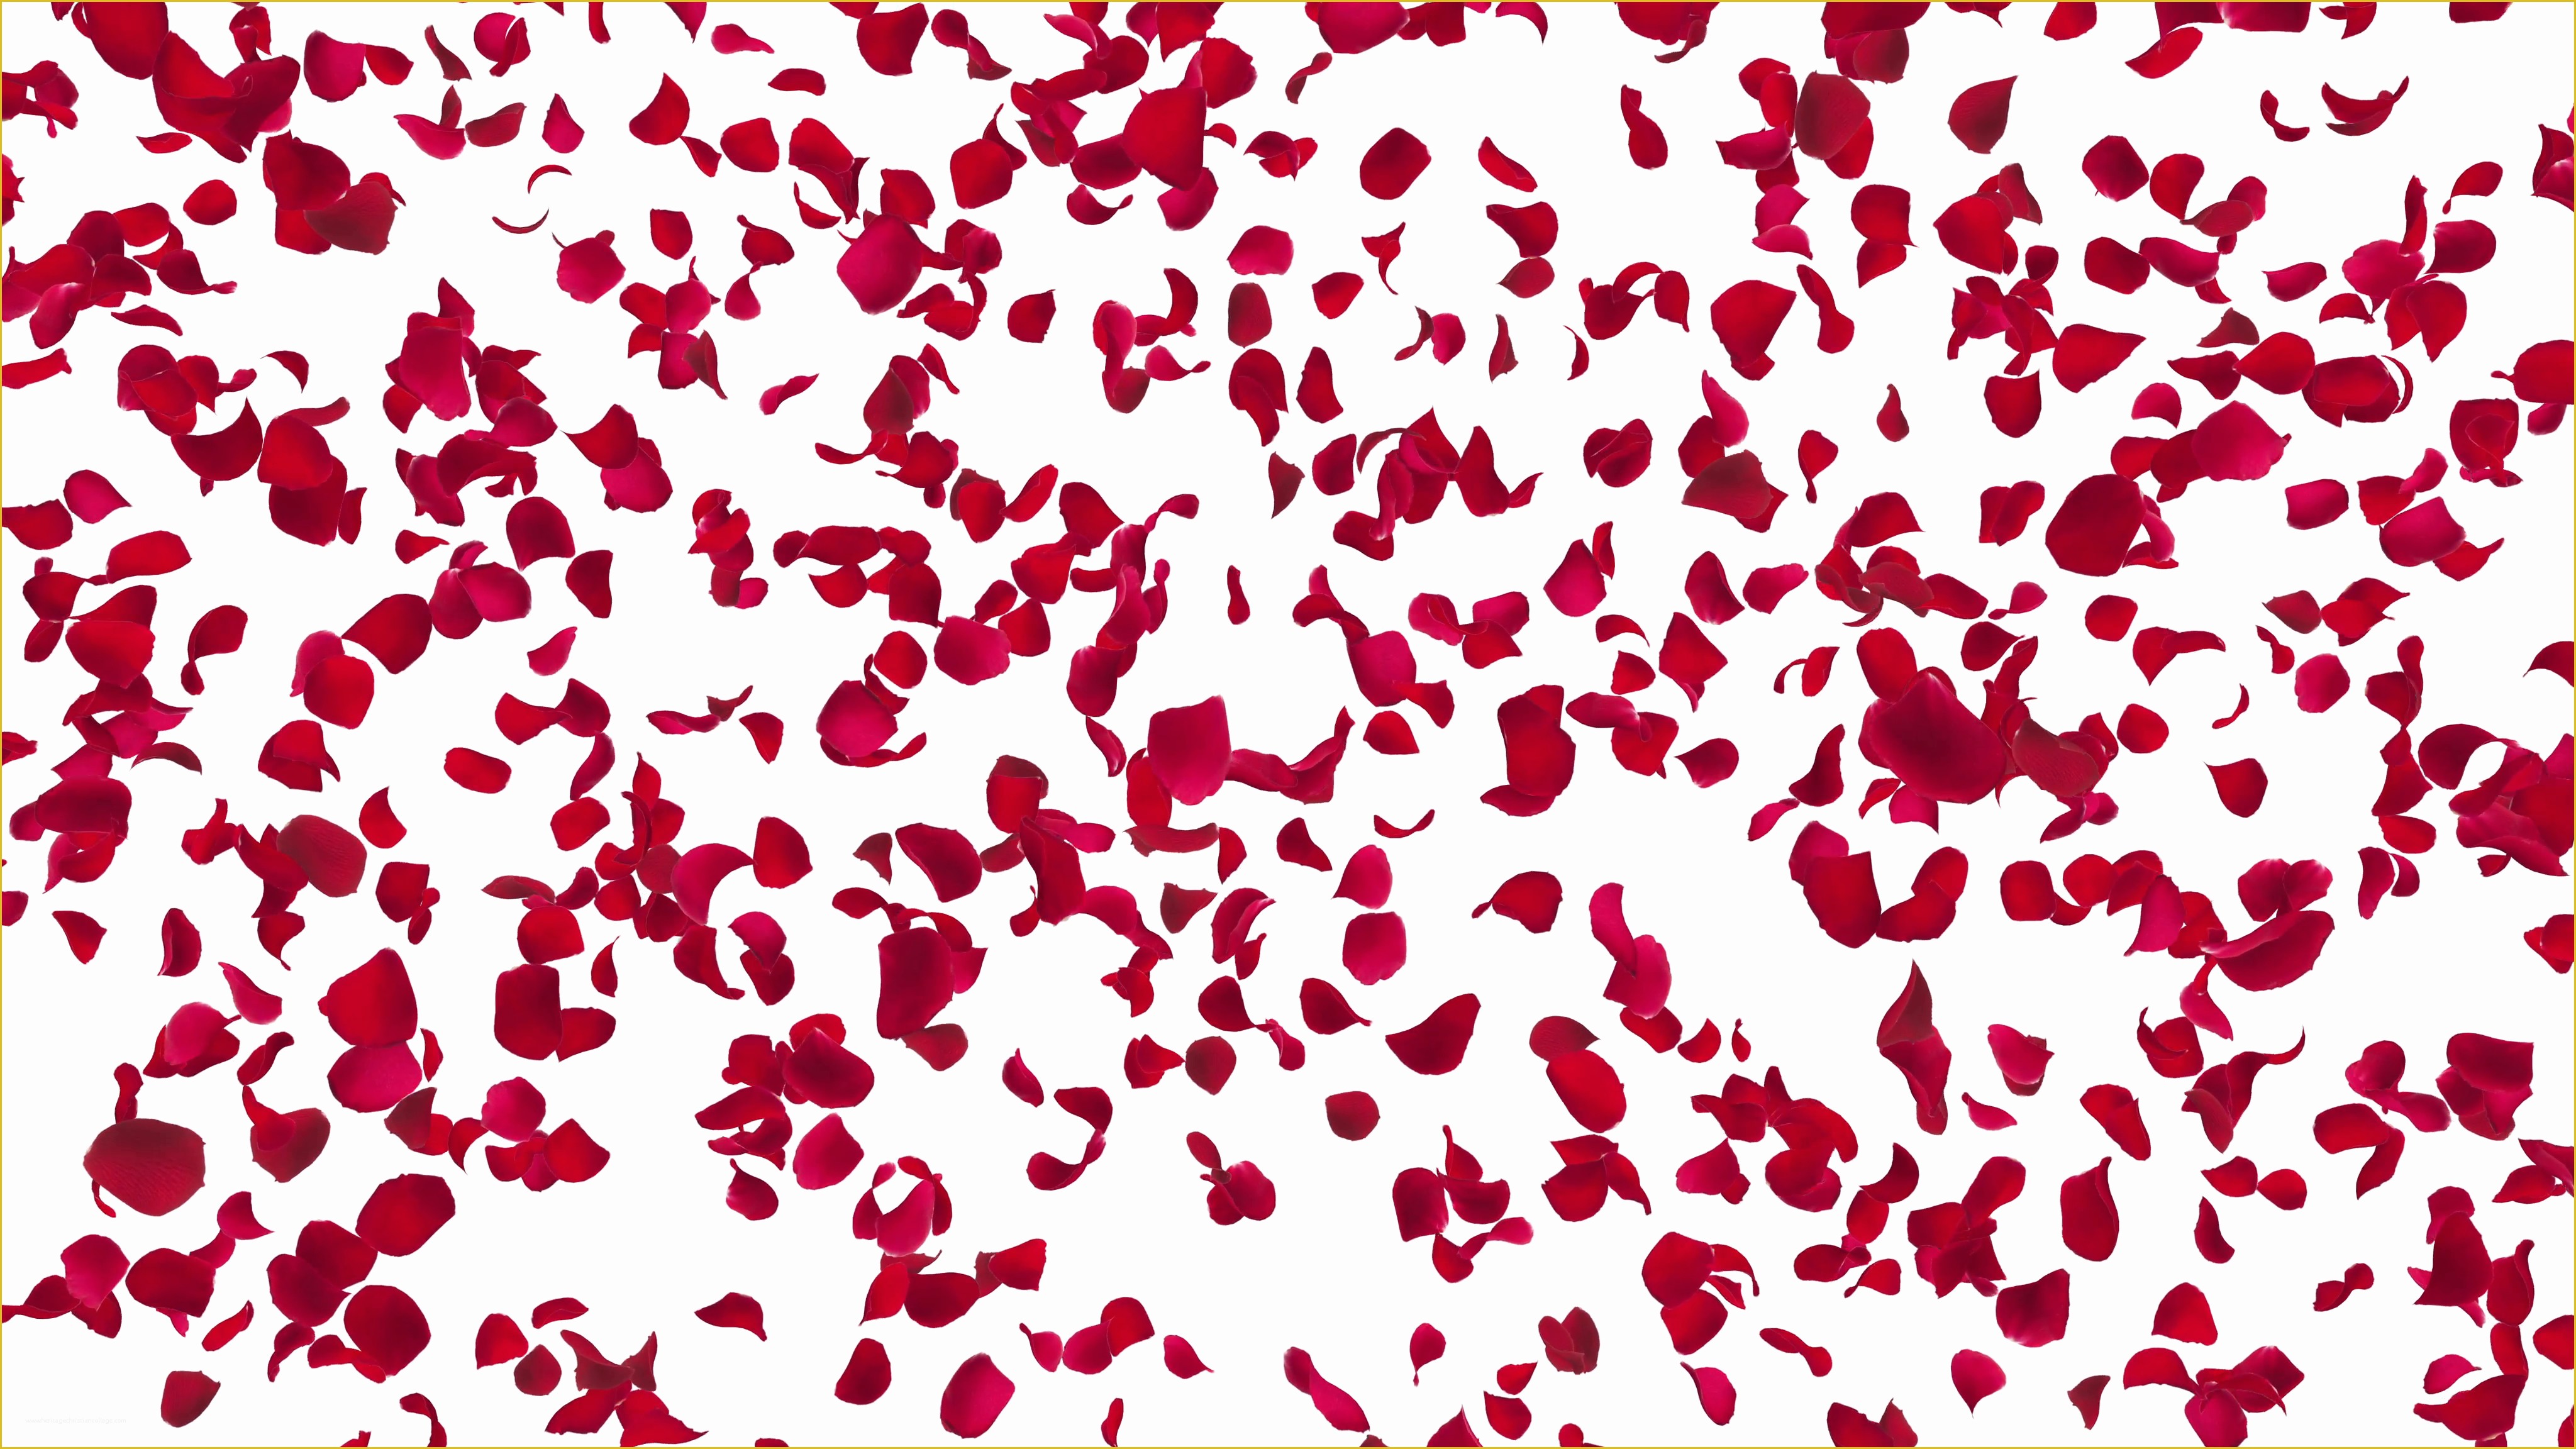 Falling Flower Petals after Effects Template Free Of Rose Petals Red Falling A 4k Motion Background Videoblocks